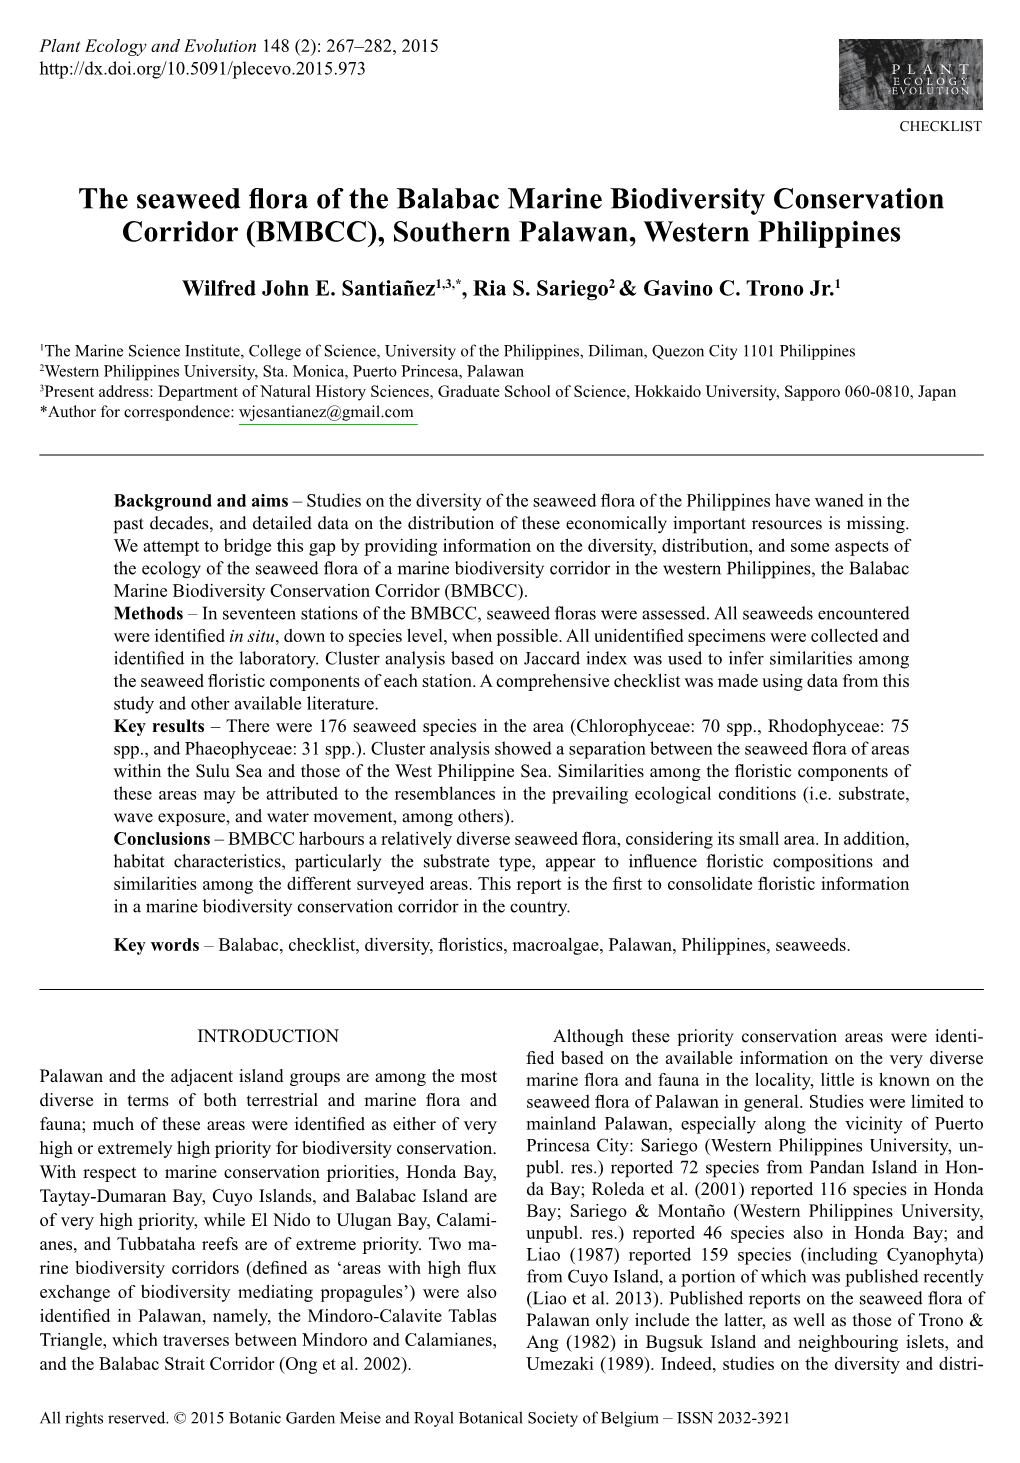 The Seaweed Flora of the Balabac Marine Biodiversity Conservation Corridor (BMBCC), Southern Palawan, Western Philippines